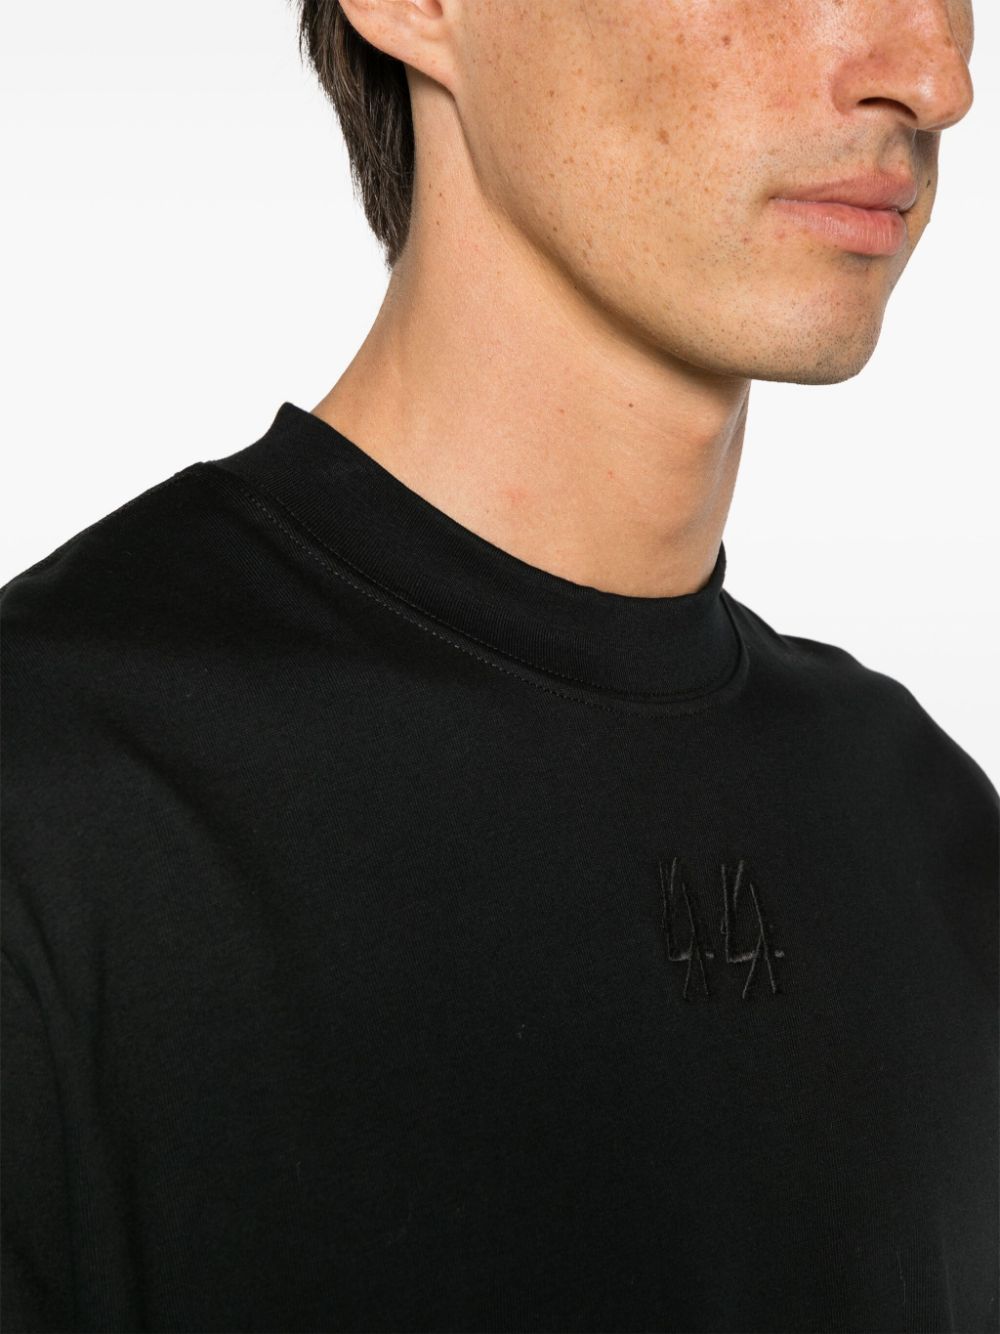 Black t-shirt with red logo